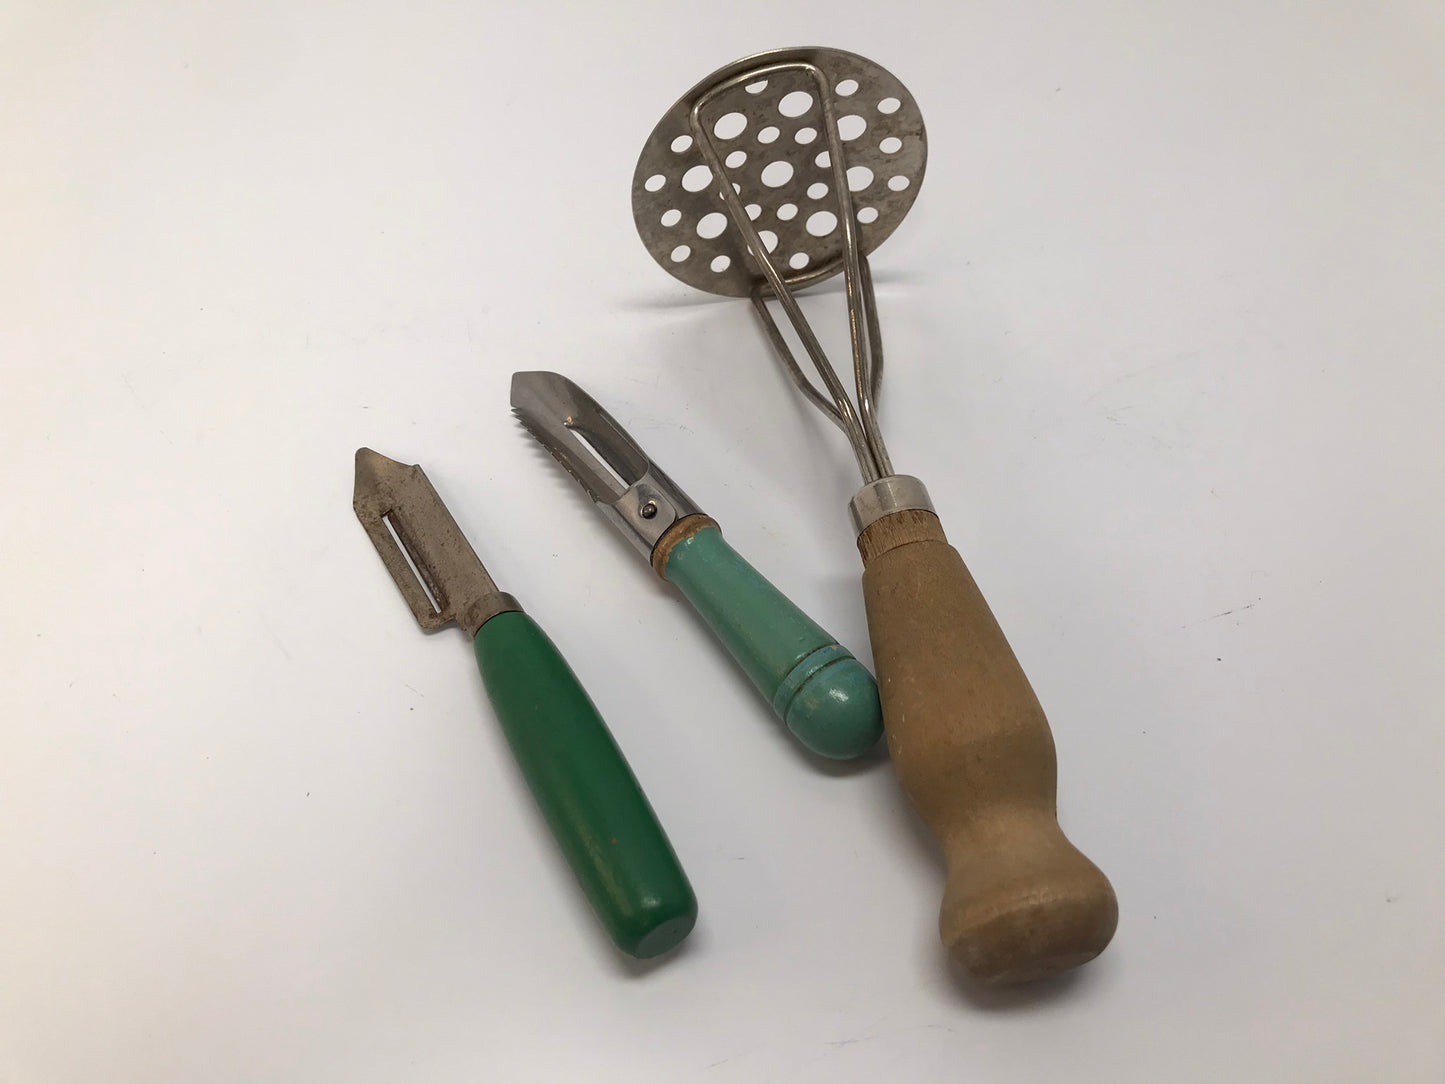 Vintage 1940's Wood Metal Kitchen Set Potato Peeler Potato Masher Apple Core RARE To Find In Such Nice Condition